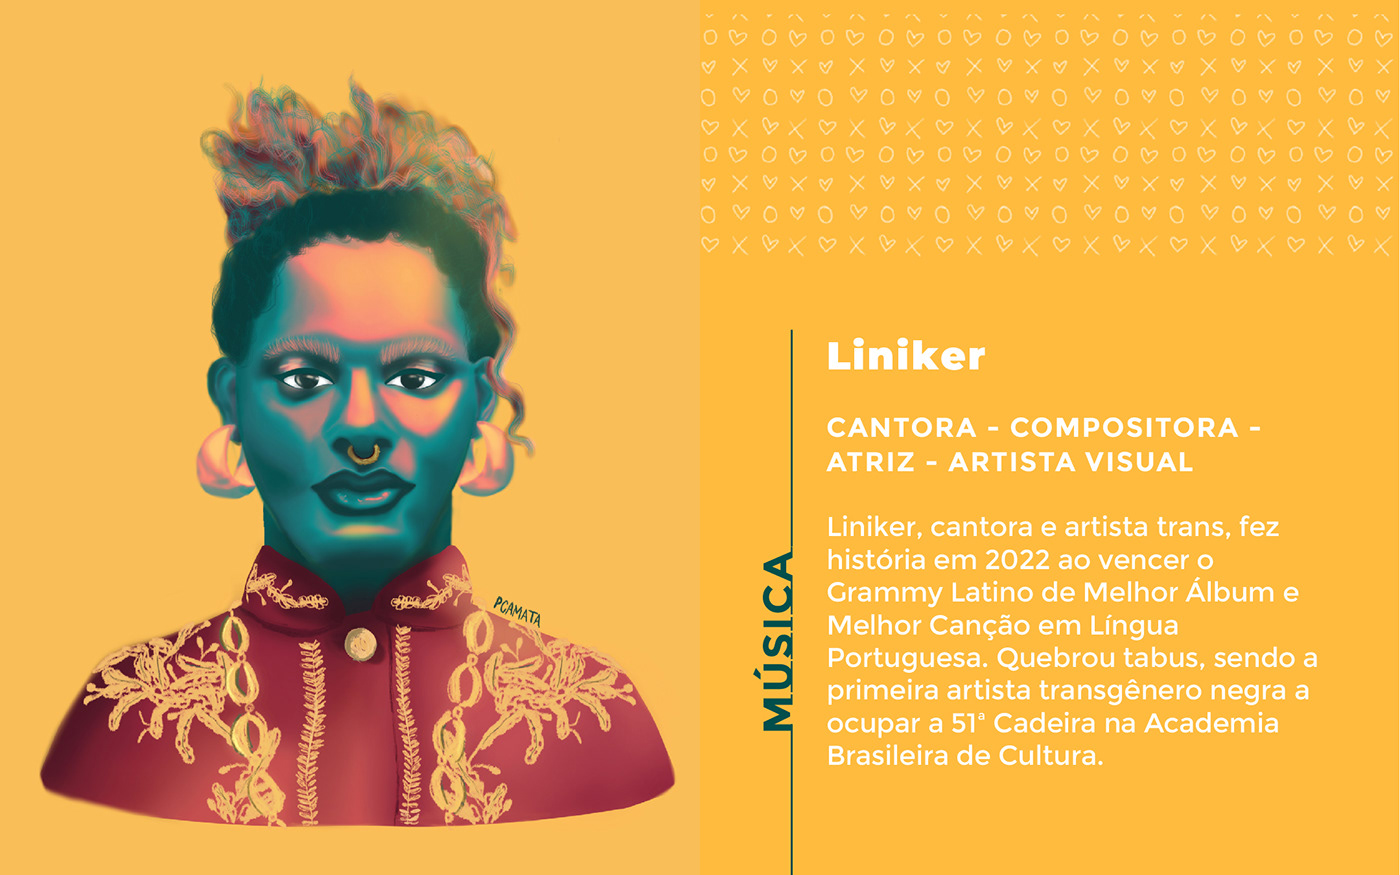 An illustrated portrait of Liniker, a brazilian transgender singer and actress from brazil